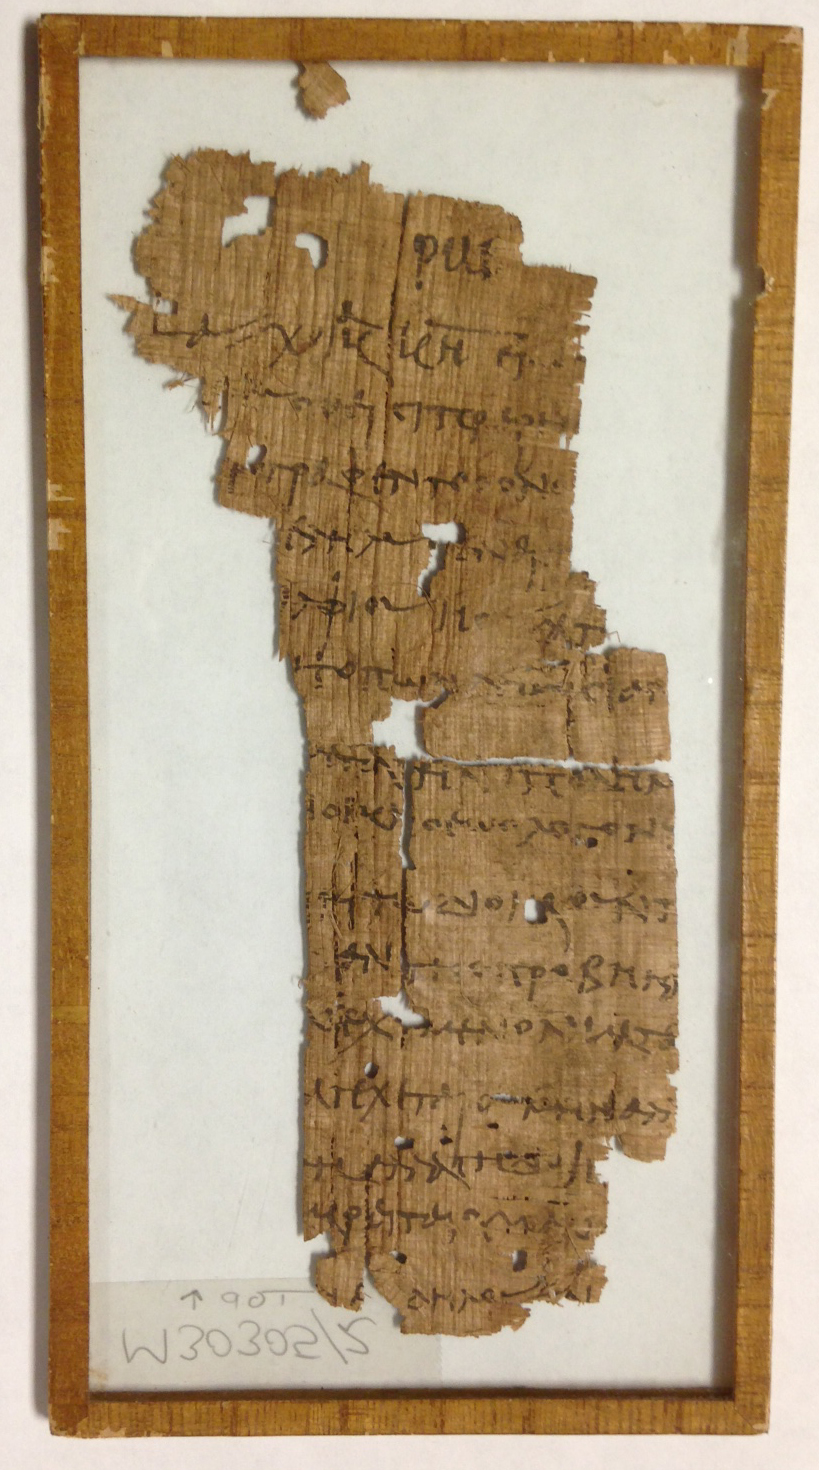 P. Virginia 1, U.Va.'s first papyrus document, measures 16.5 x 8 cm. It was written in Greek, probably in Egypt during the 3rd century CE. Purchased on the Associates Endowment Fund.